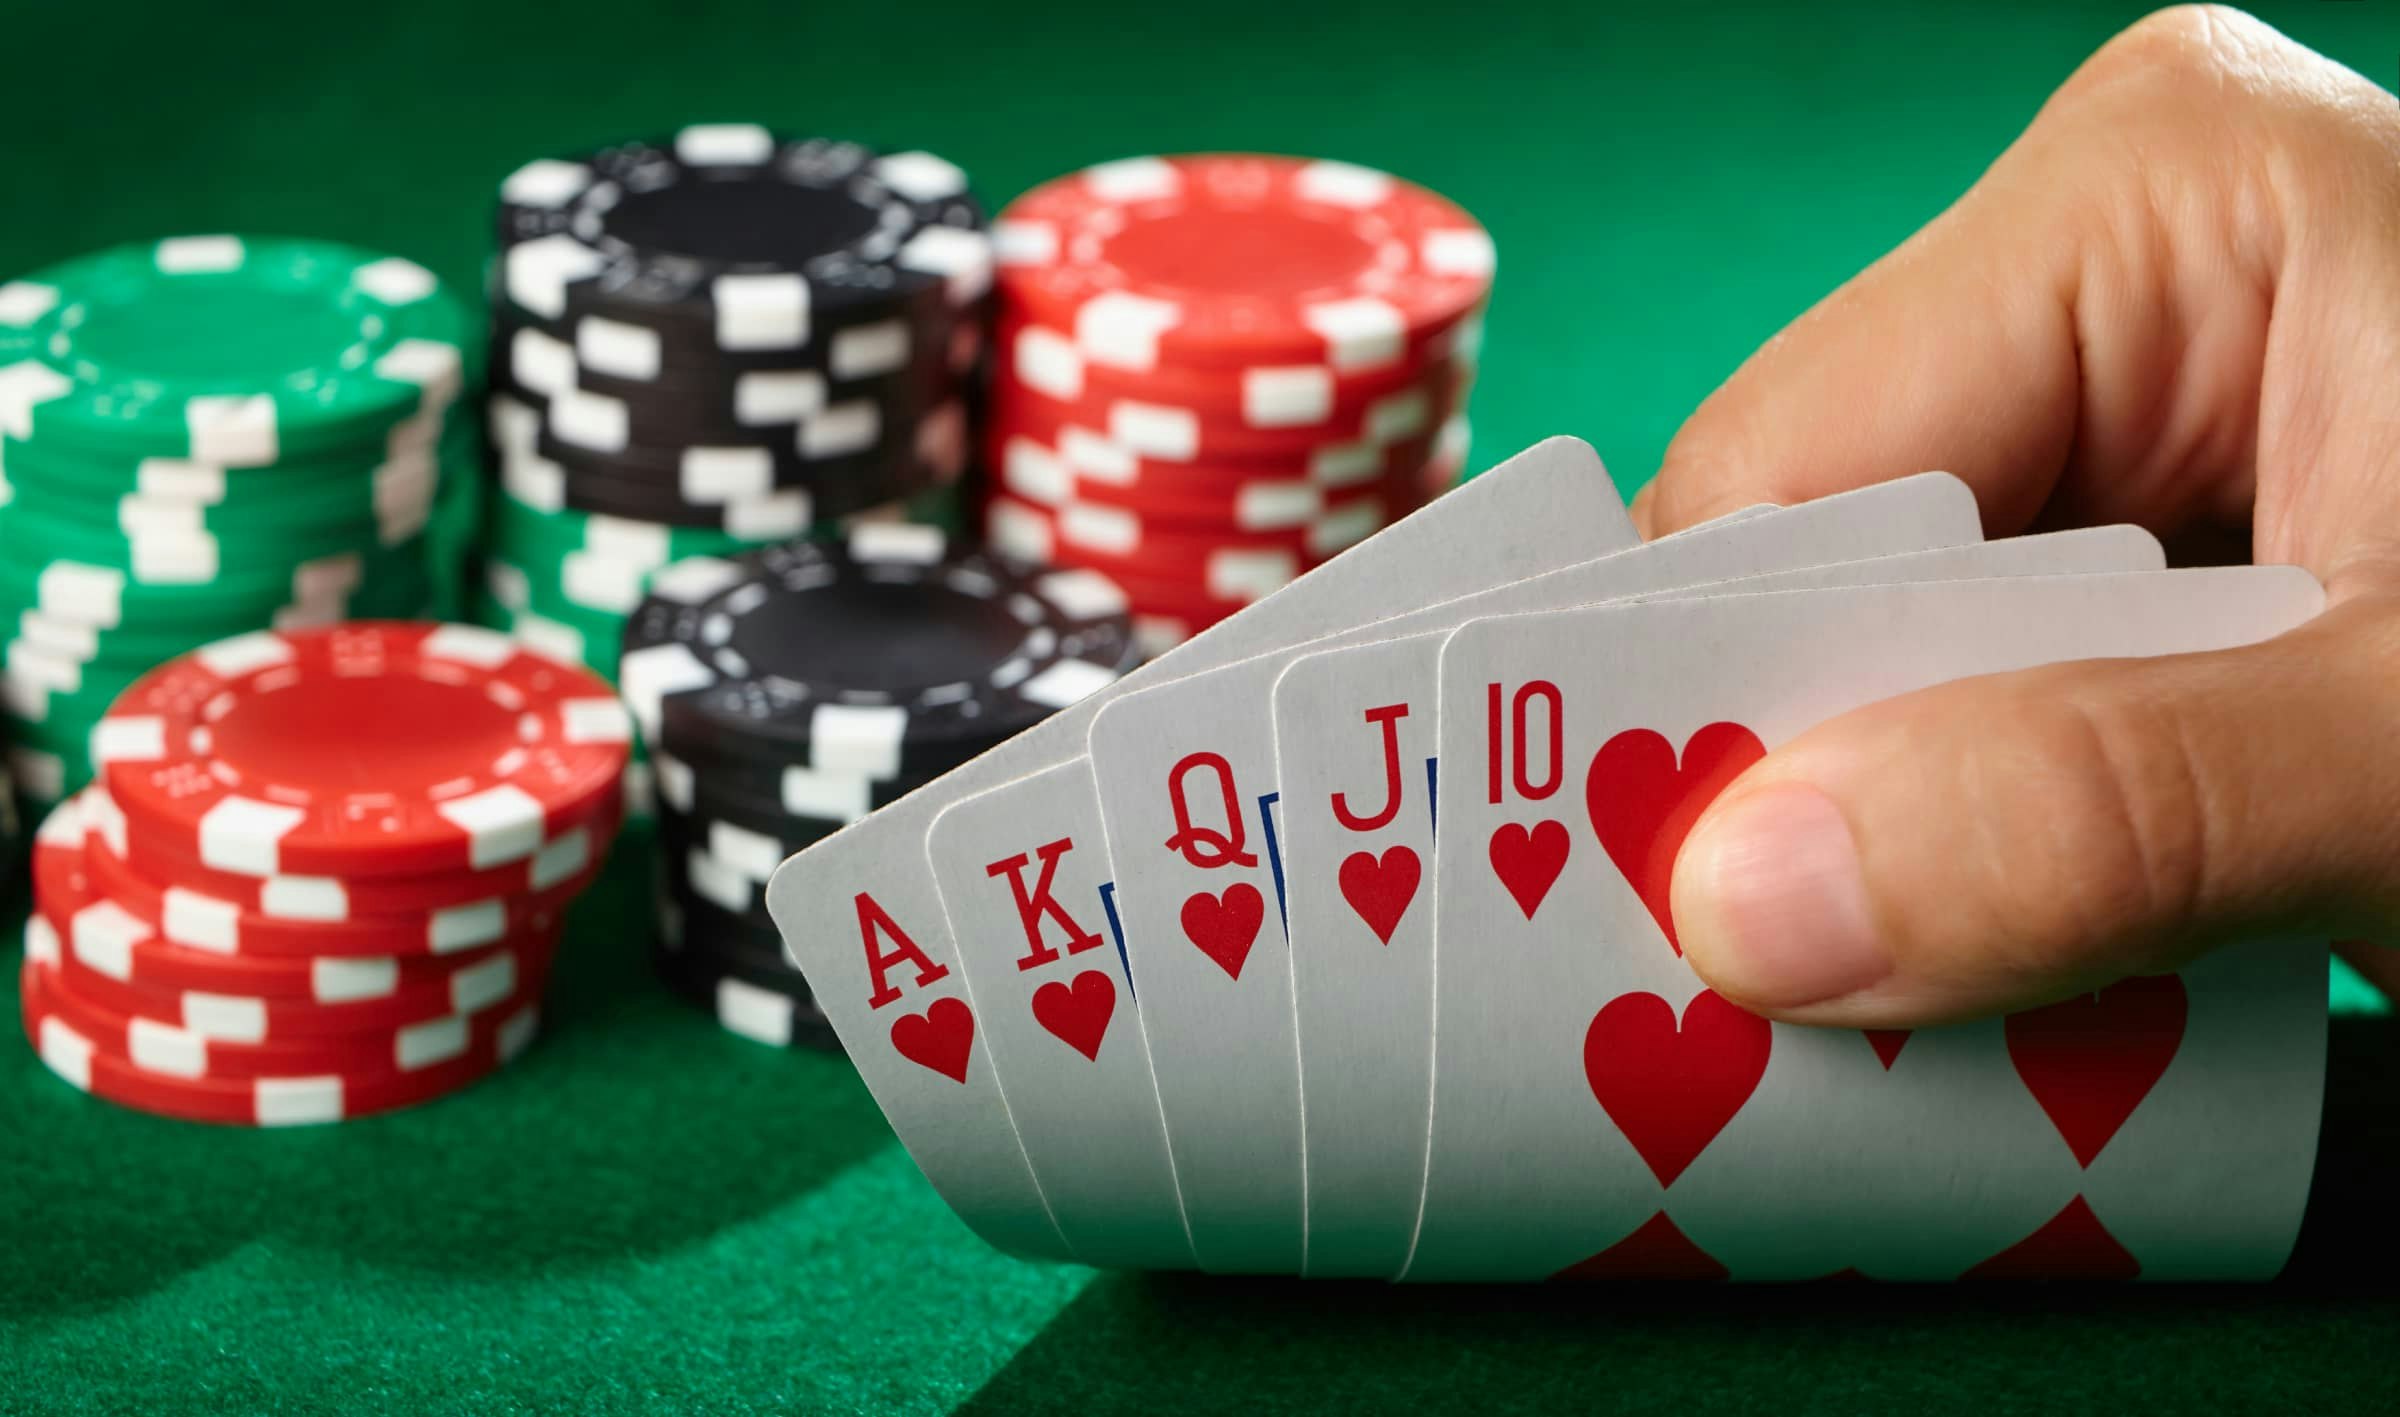 What are the odds of landing a royal flush in poker?